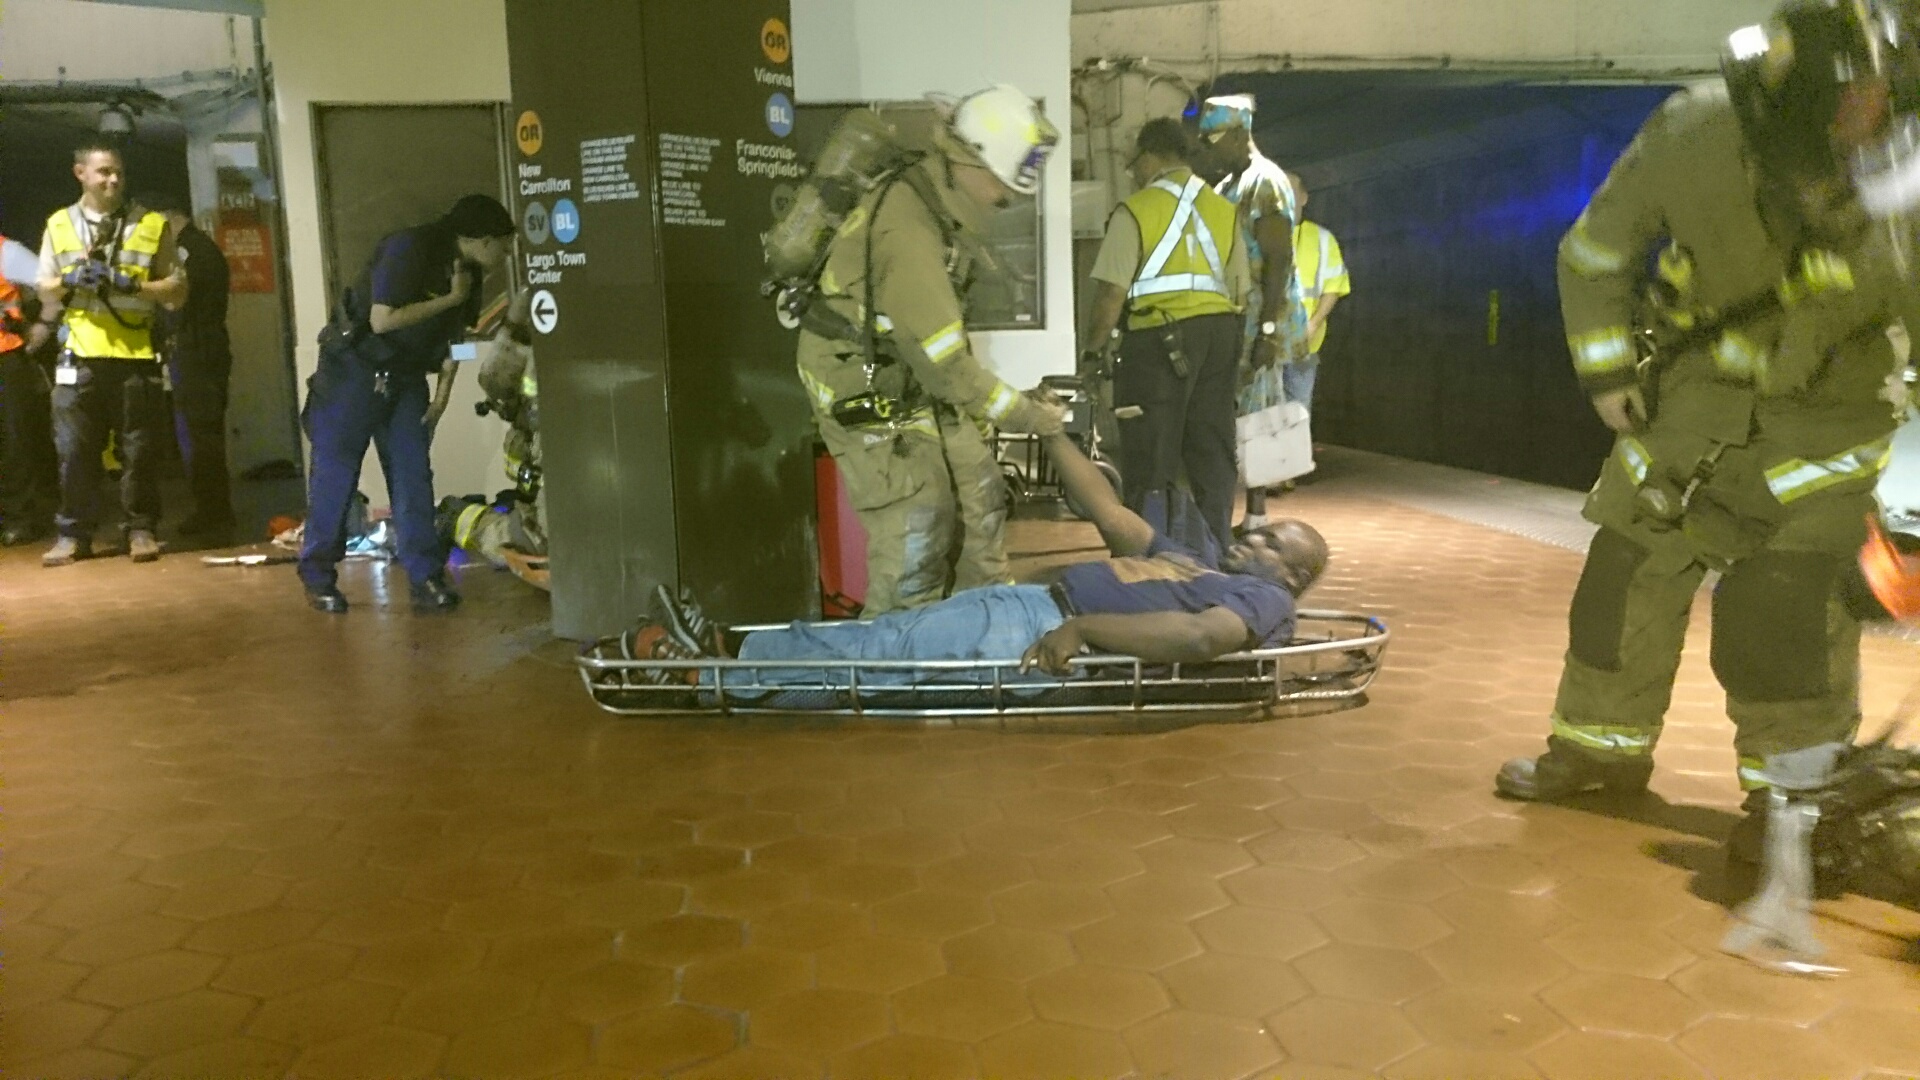 Metro, first responders tested in smoke incident drill (Video)